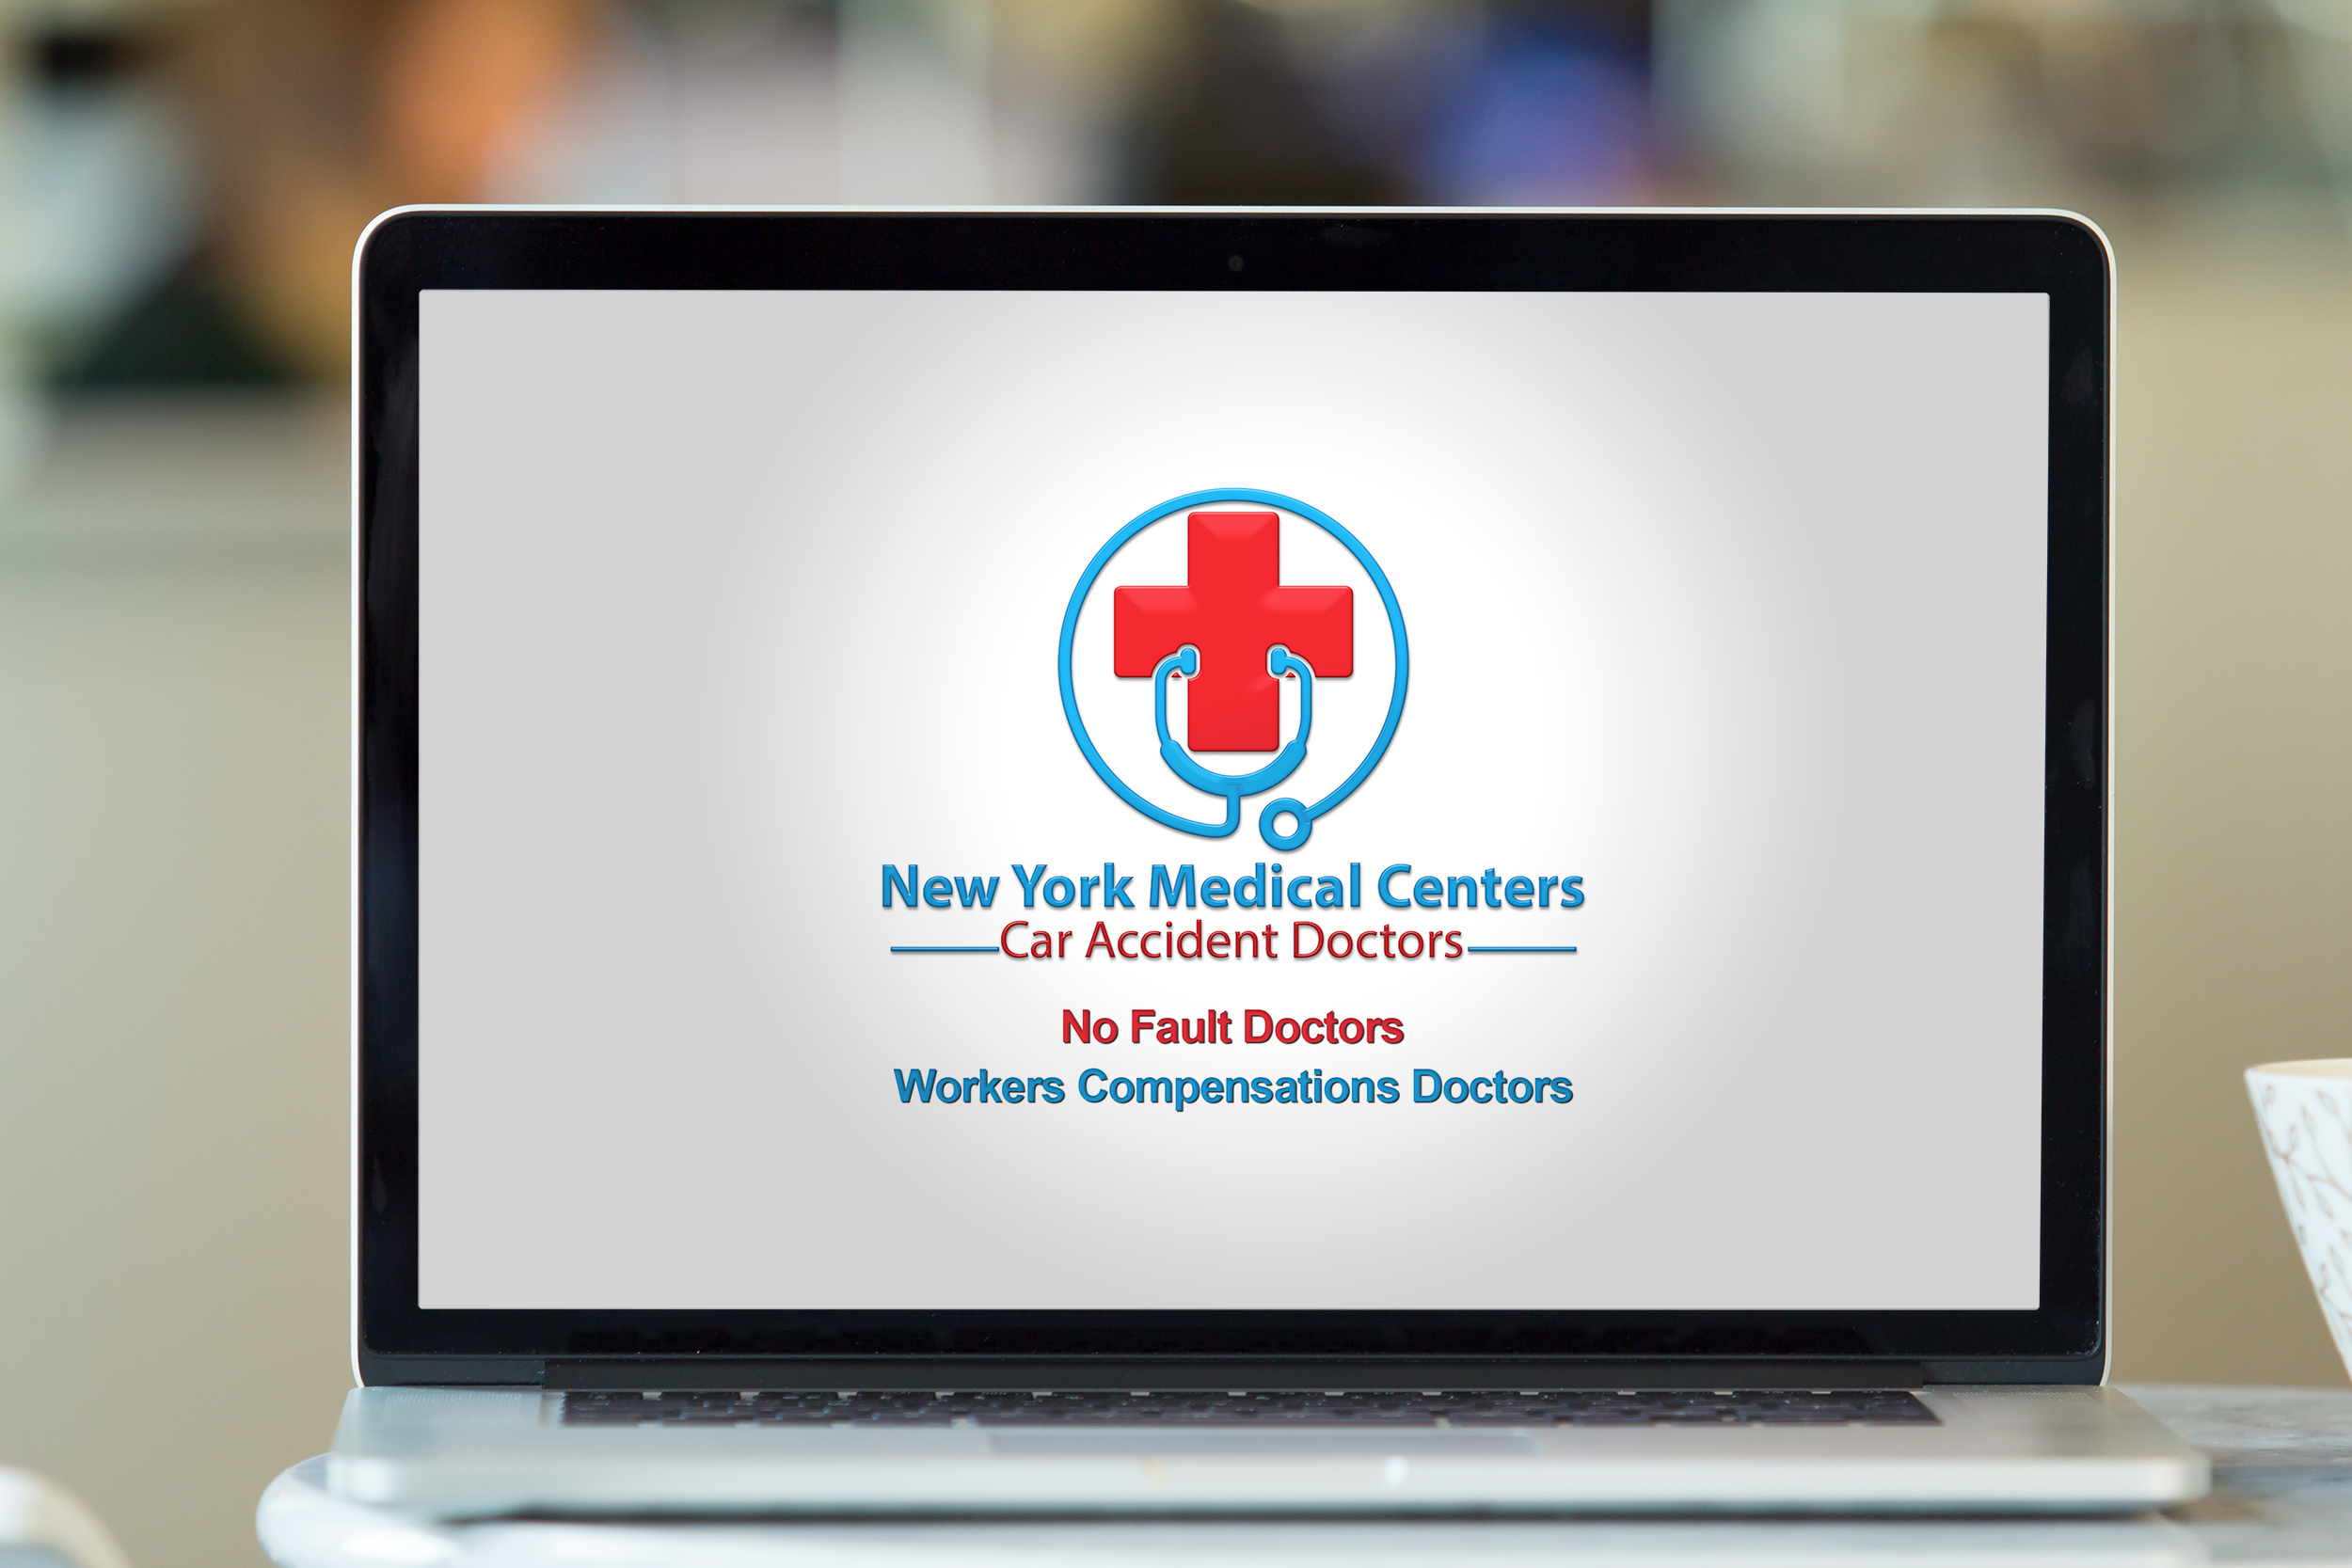 New York Medical Centers - car accoident doctors - no fault doctors - workers compensation doctors